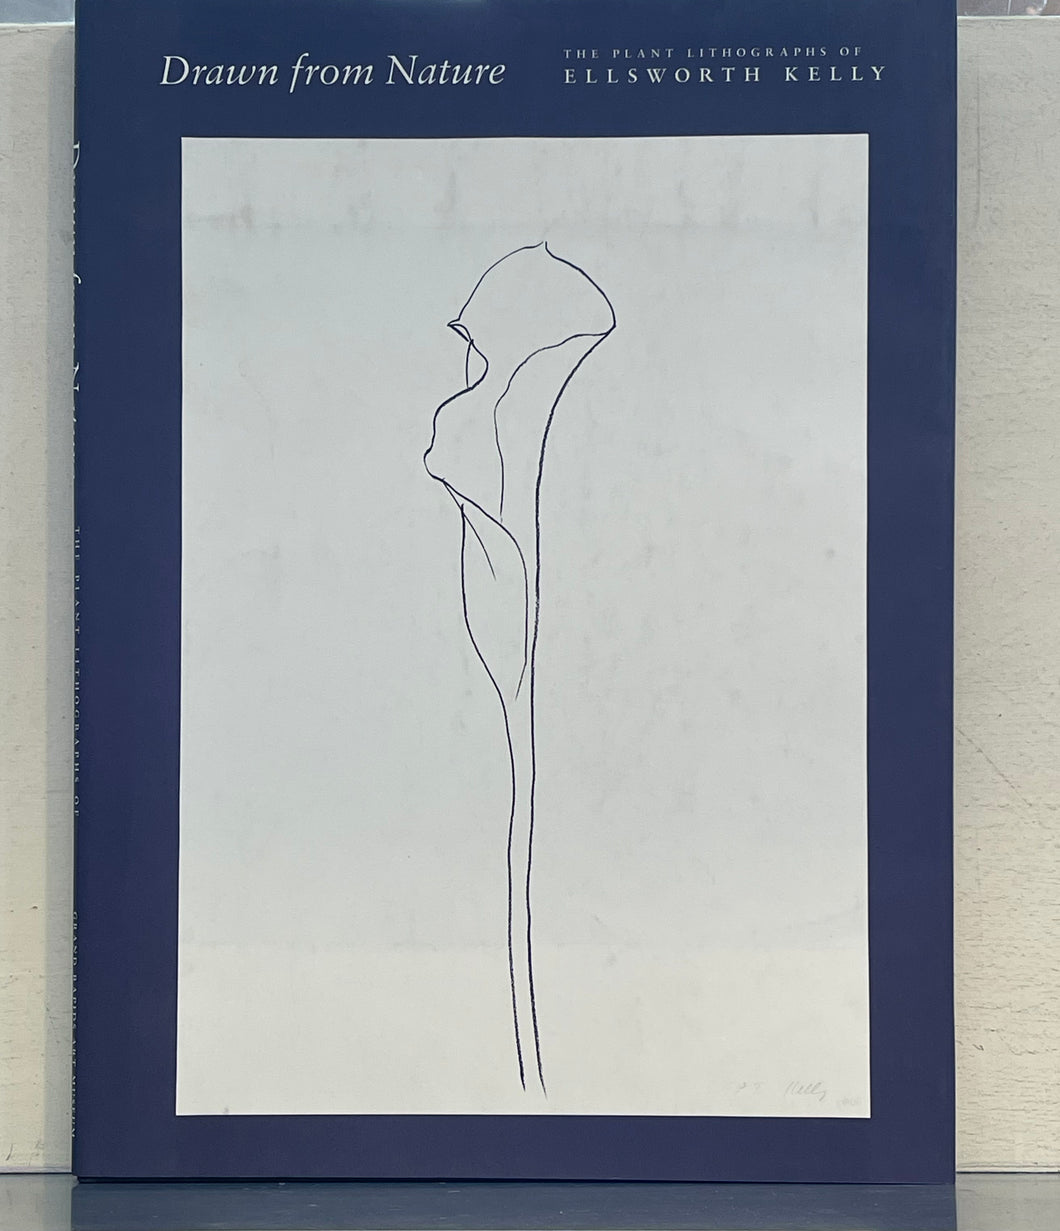 Drawn From Nature: The Plant Lithographs Of Ellsworth Kelly